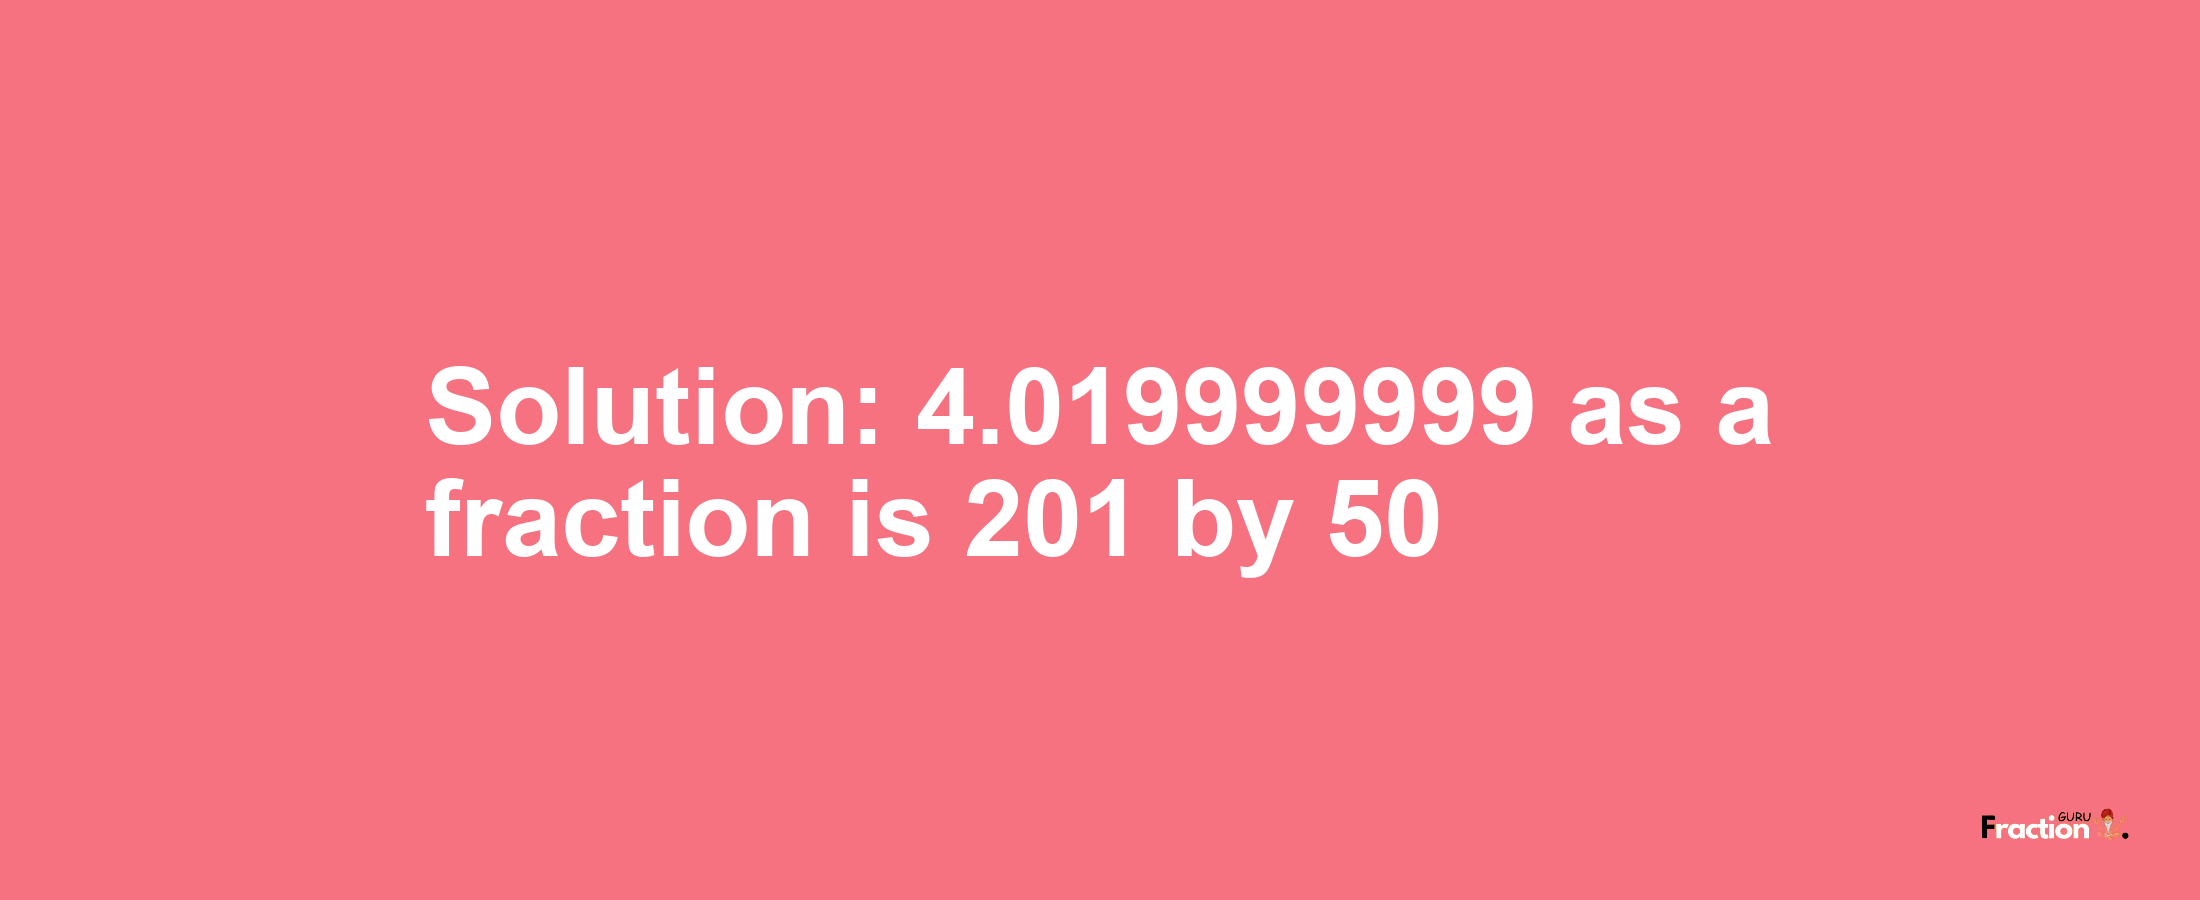 Solution:4.019999999 as a fraction is 201/50